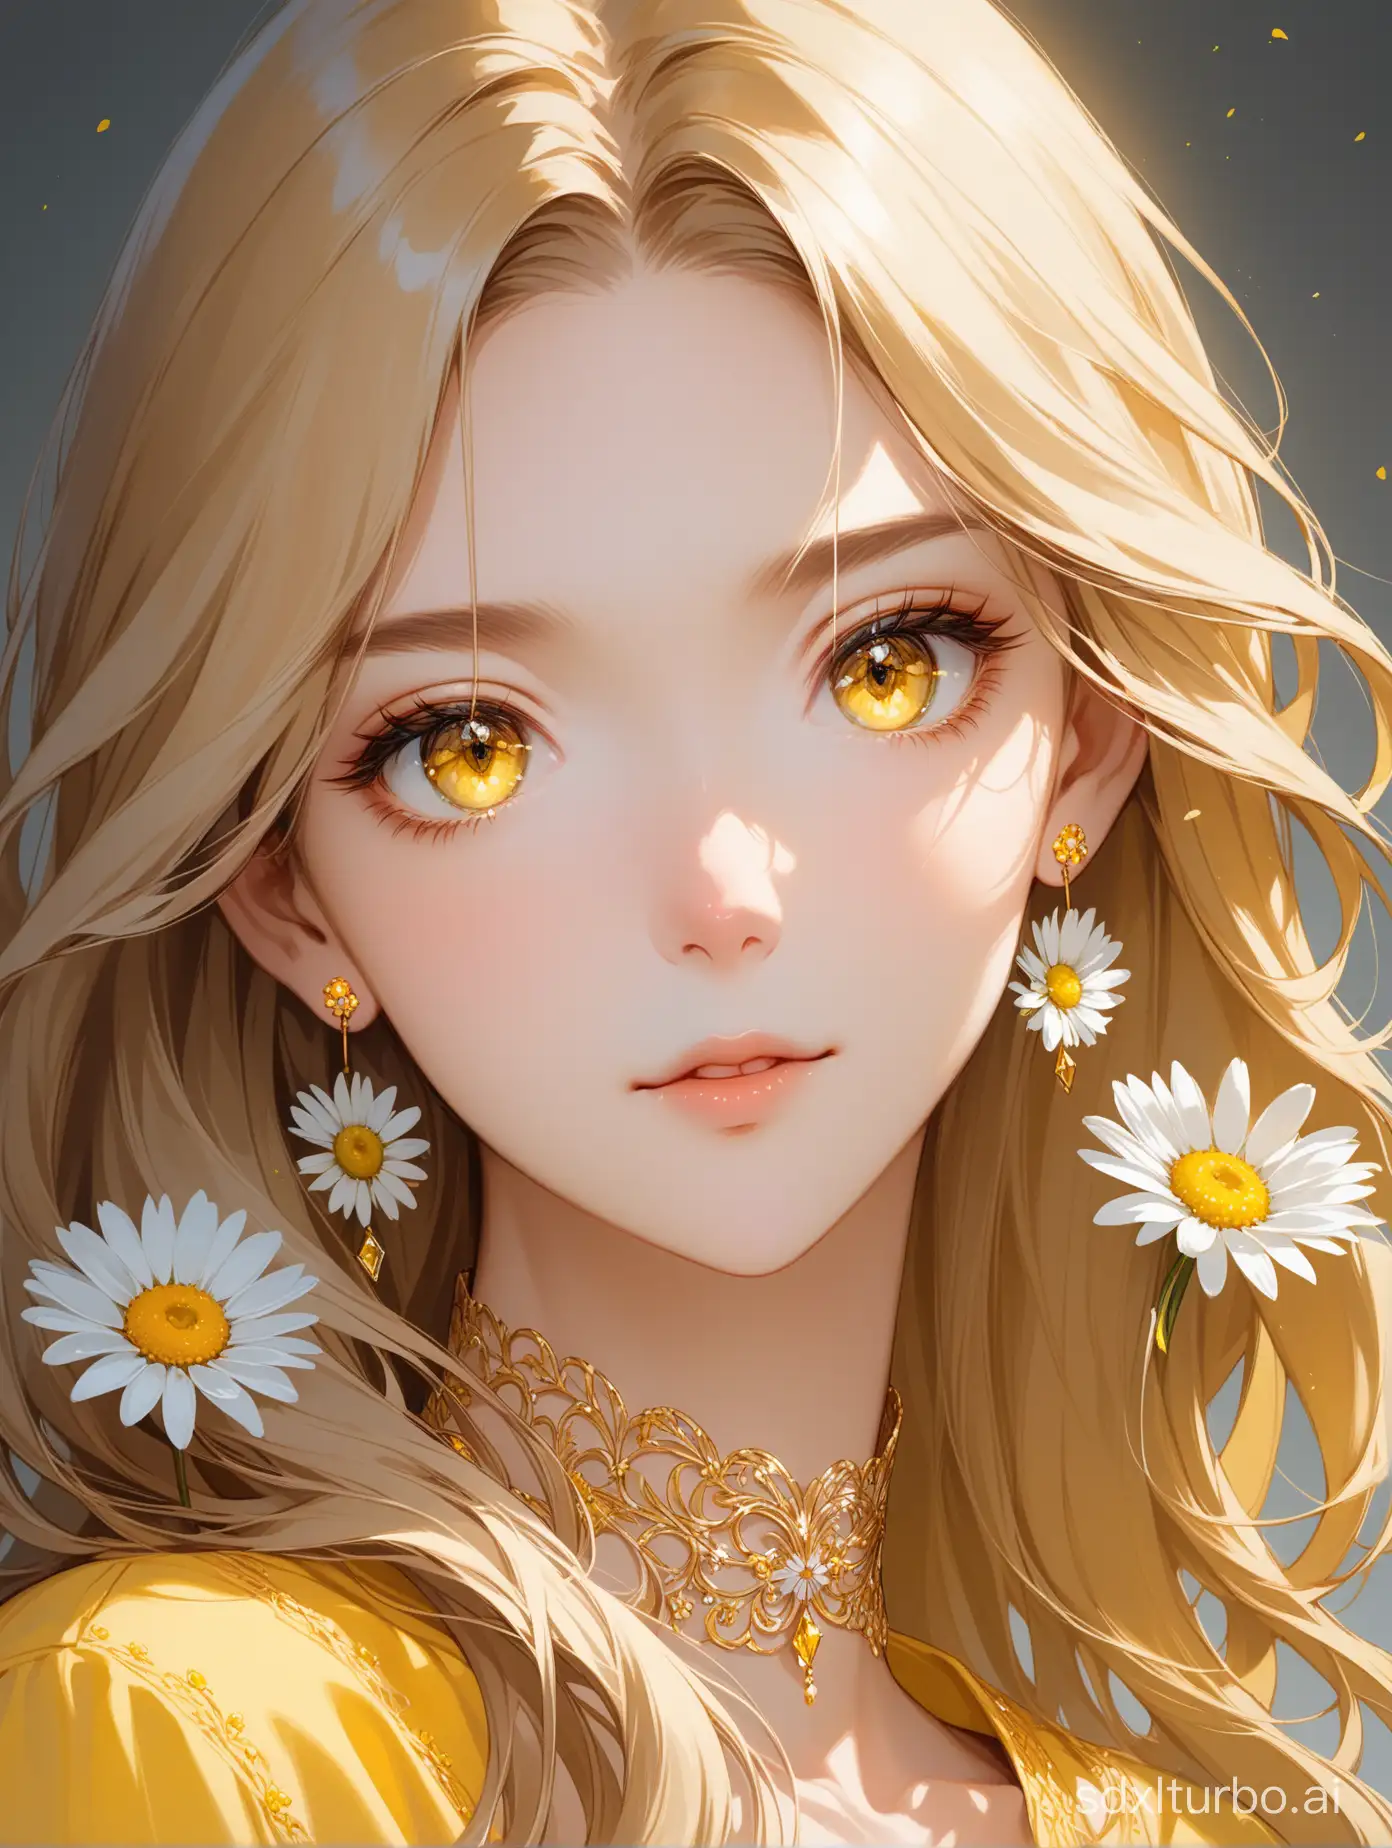 Highest quality, masterpiece, a girl, light brown long hair, slightly curled hair, yellow earrings, neck collar, (yellow and white clothing), (exquisite hair depiction), (exquisite yellow eyes depiction), (exquisite facial features depiction), solo, (daisies), portrait description, solid color background, sense of fragmentation